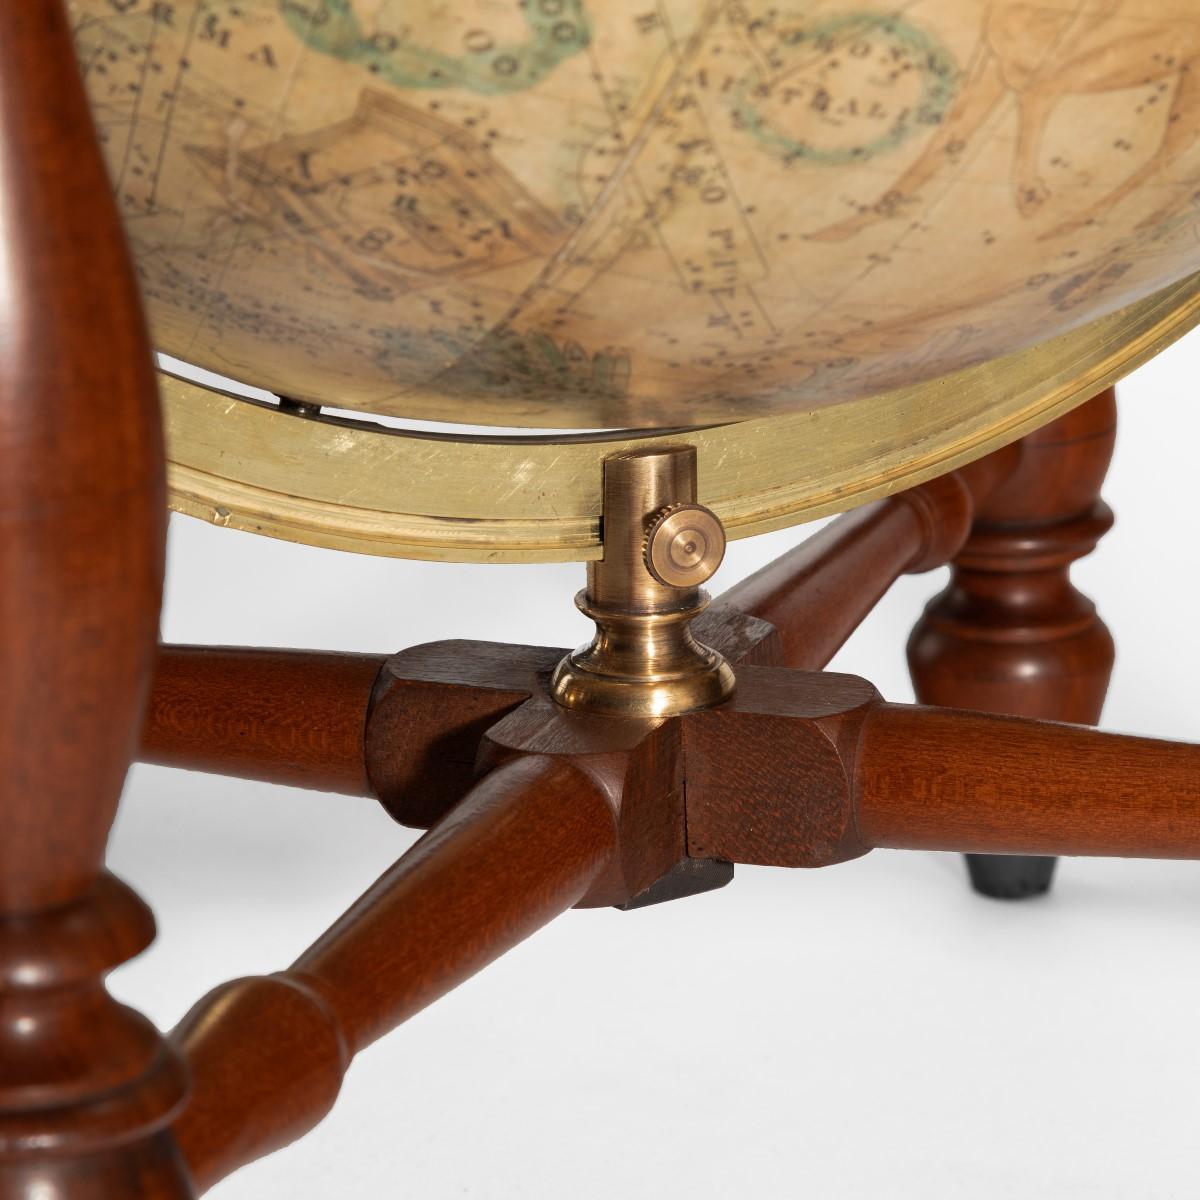 19th Century Pair of 12 Inch Table Globes by Josiah Loring Dated 1844 and 1841